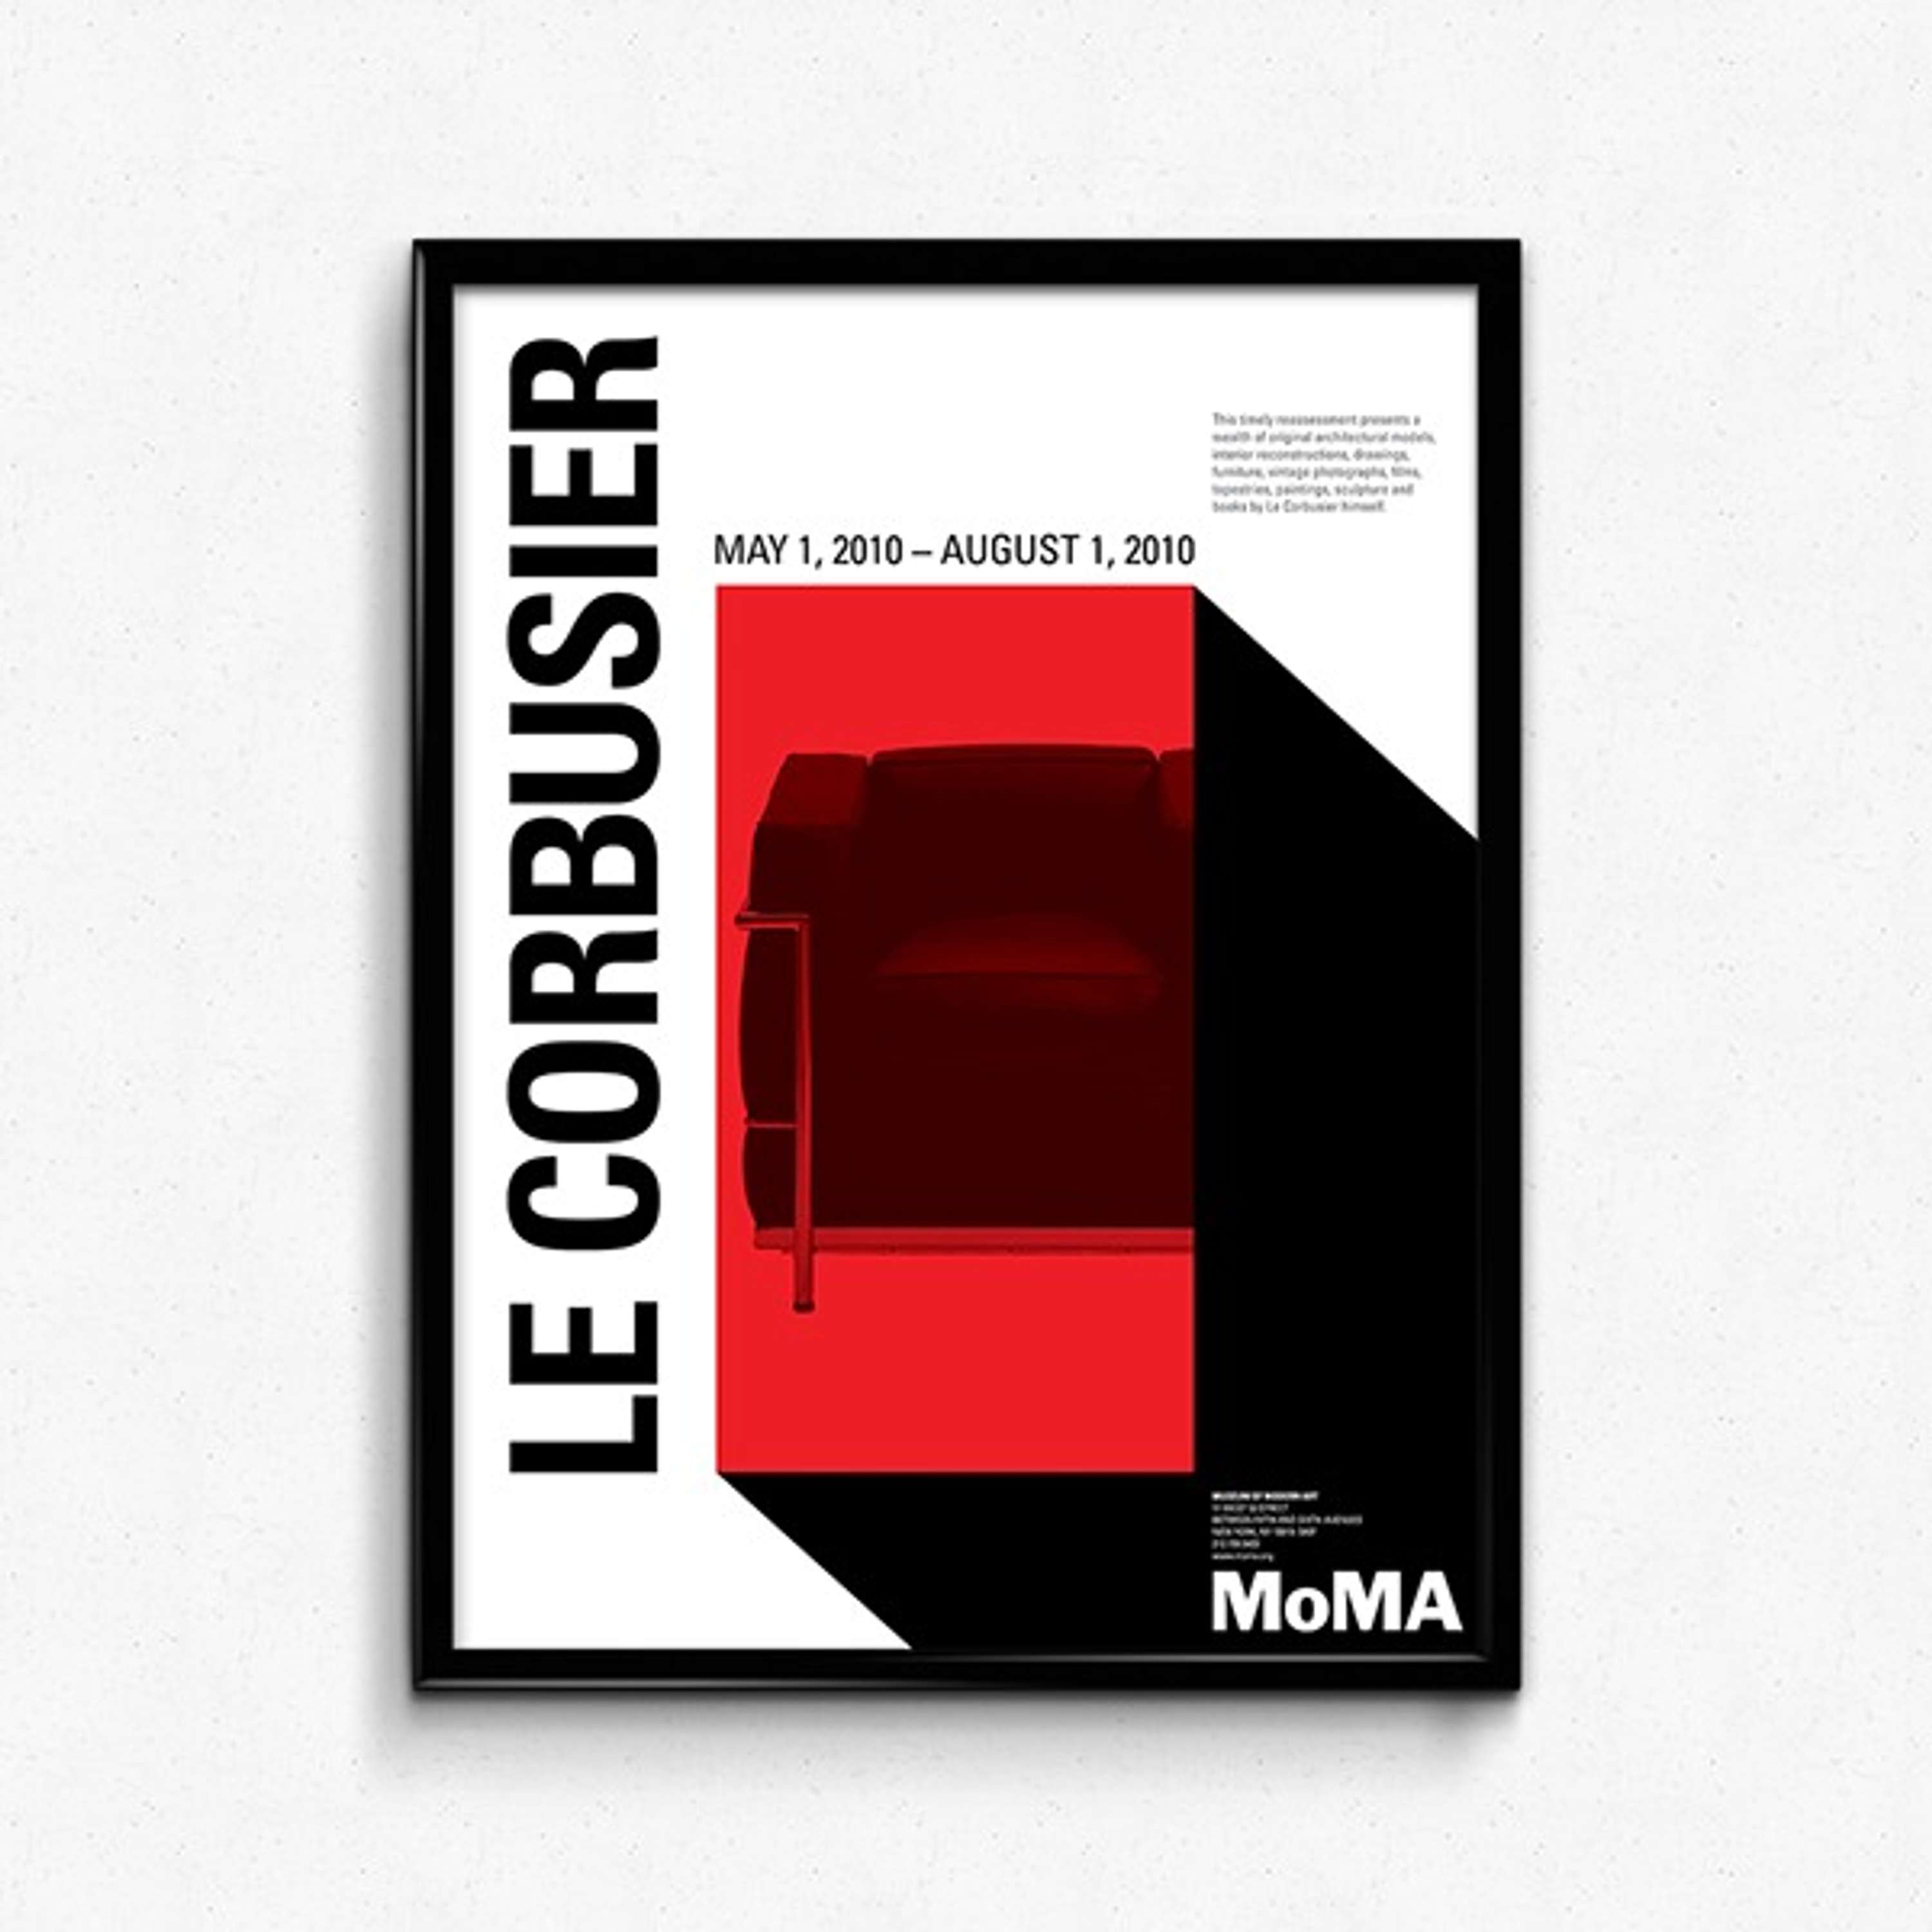 Le Corbusier at MoMA | Dots